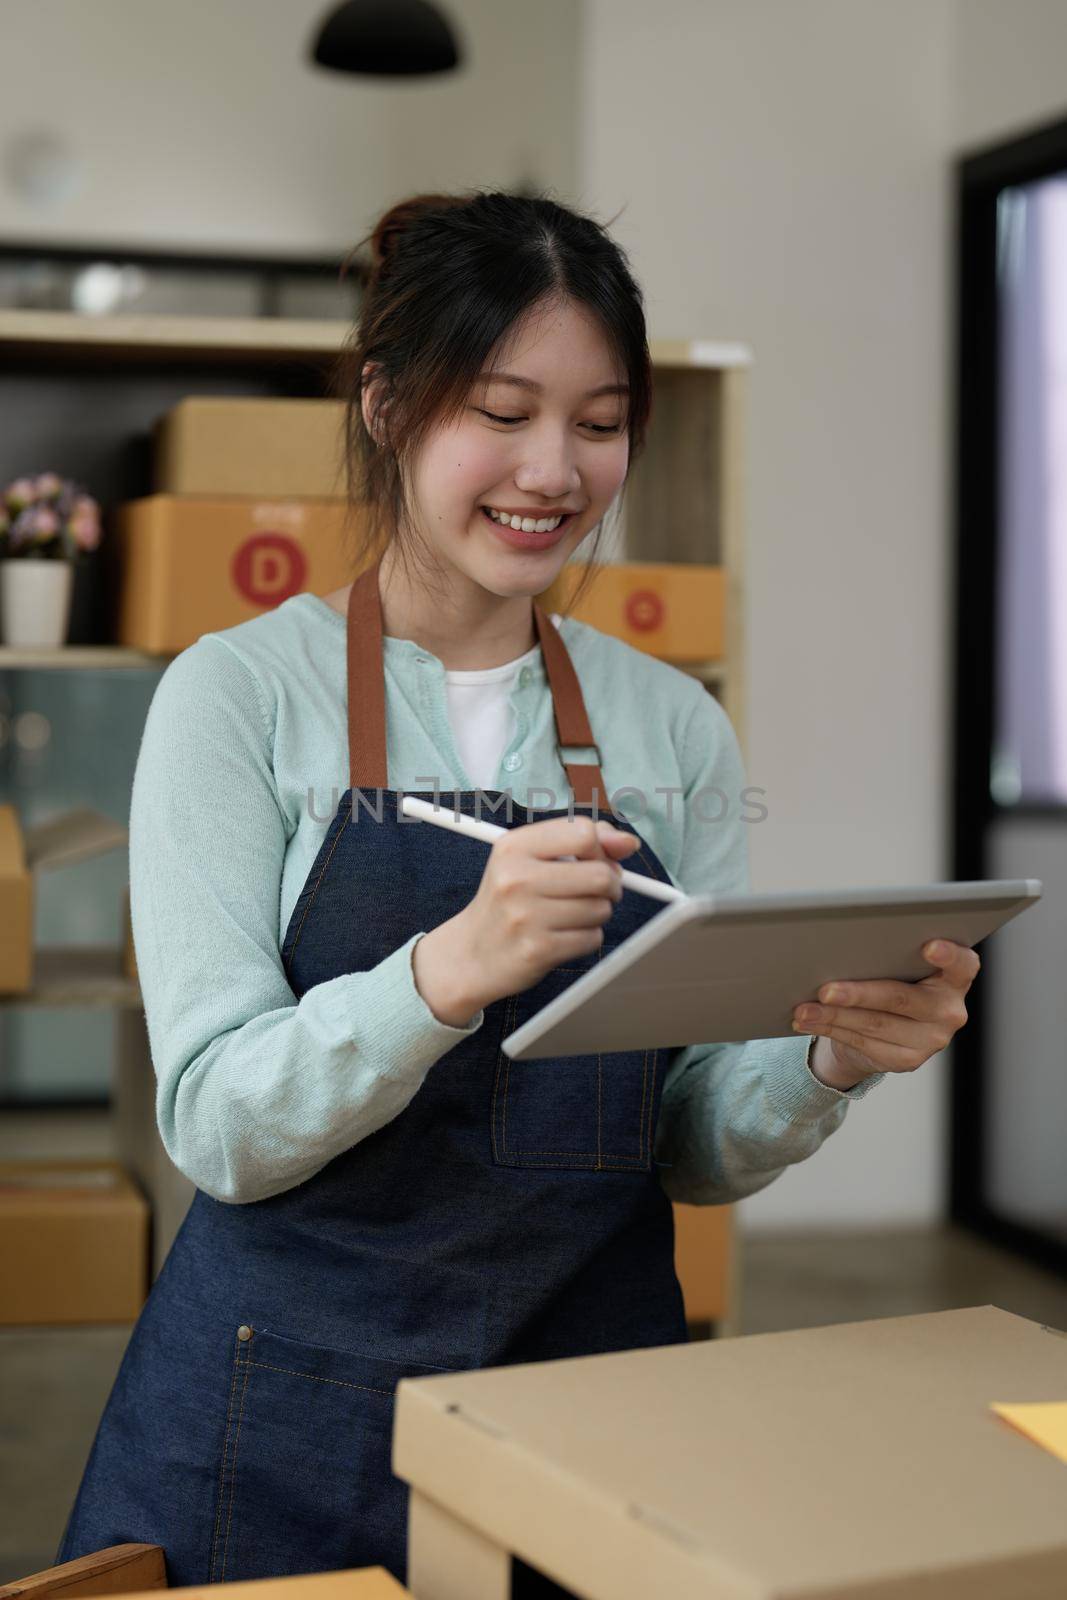 Startup small business entrepreneur SME, asian woman checking order. Portrait young Asian small business owner home office, online sell marketing delivery, SME e-commerce telemarketing concept.